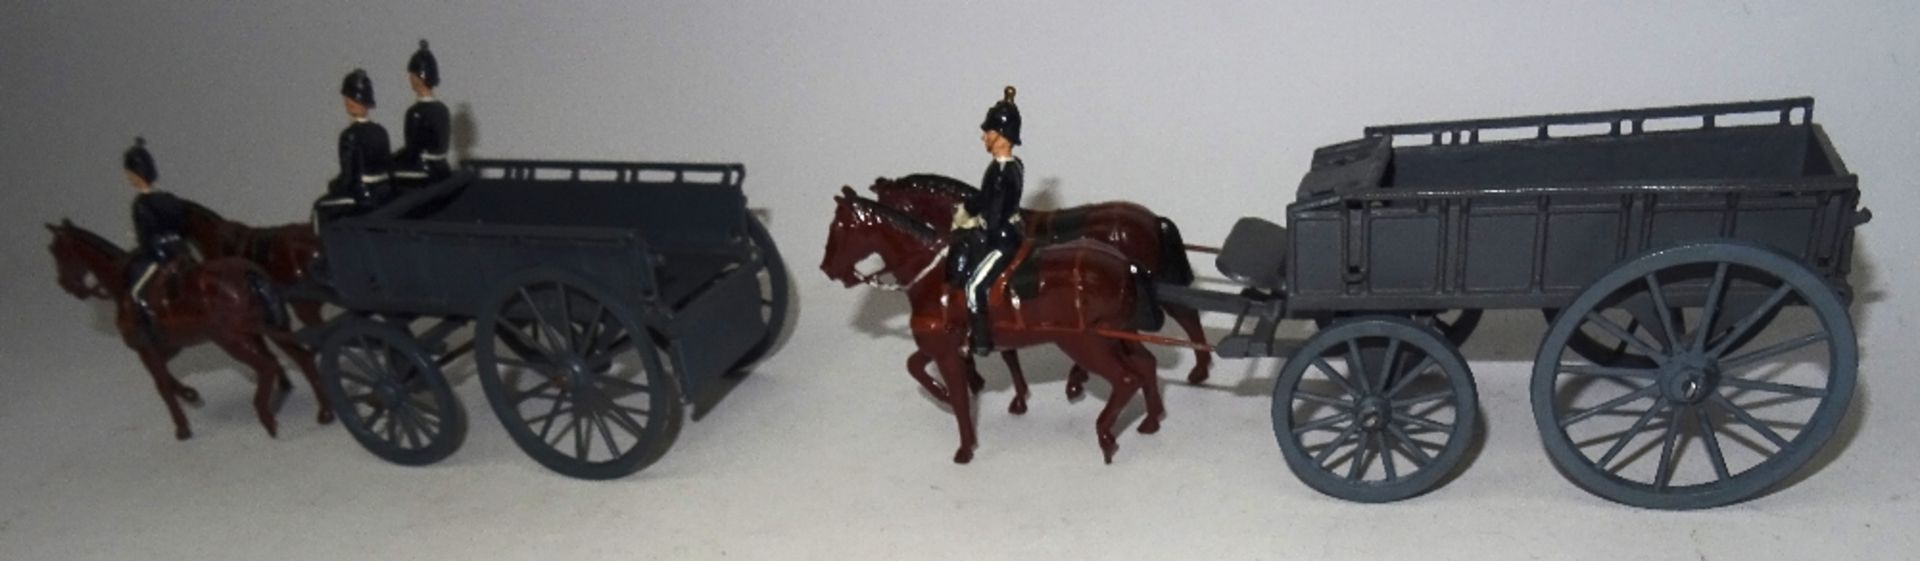 Britains two sets 146, Royal Army Service Corps two horse Supply Wagon - Image 3 of 5